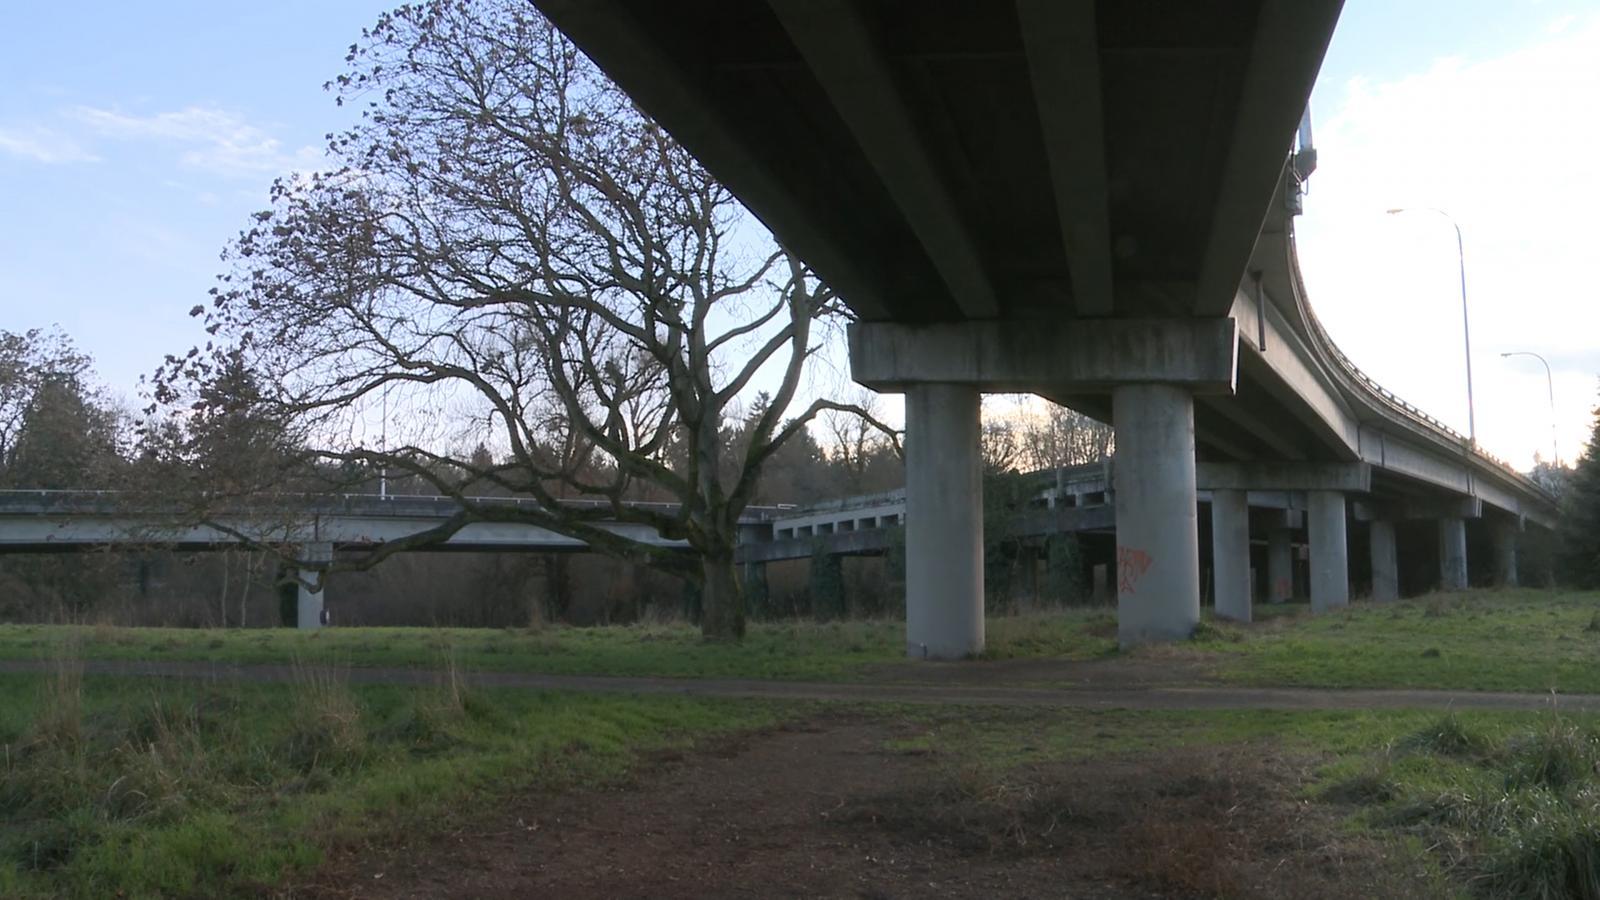 Portion of abandoned RH Thomson Expressway project, partly covered in ivy